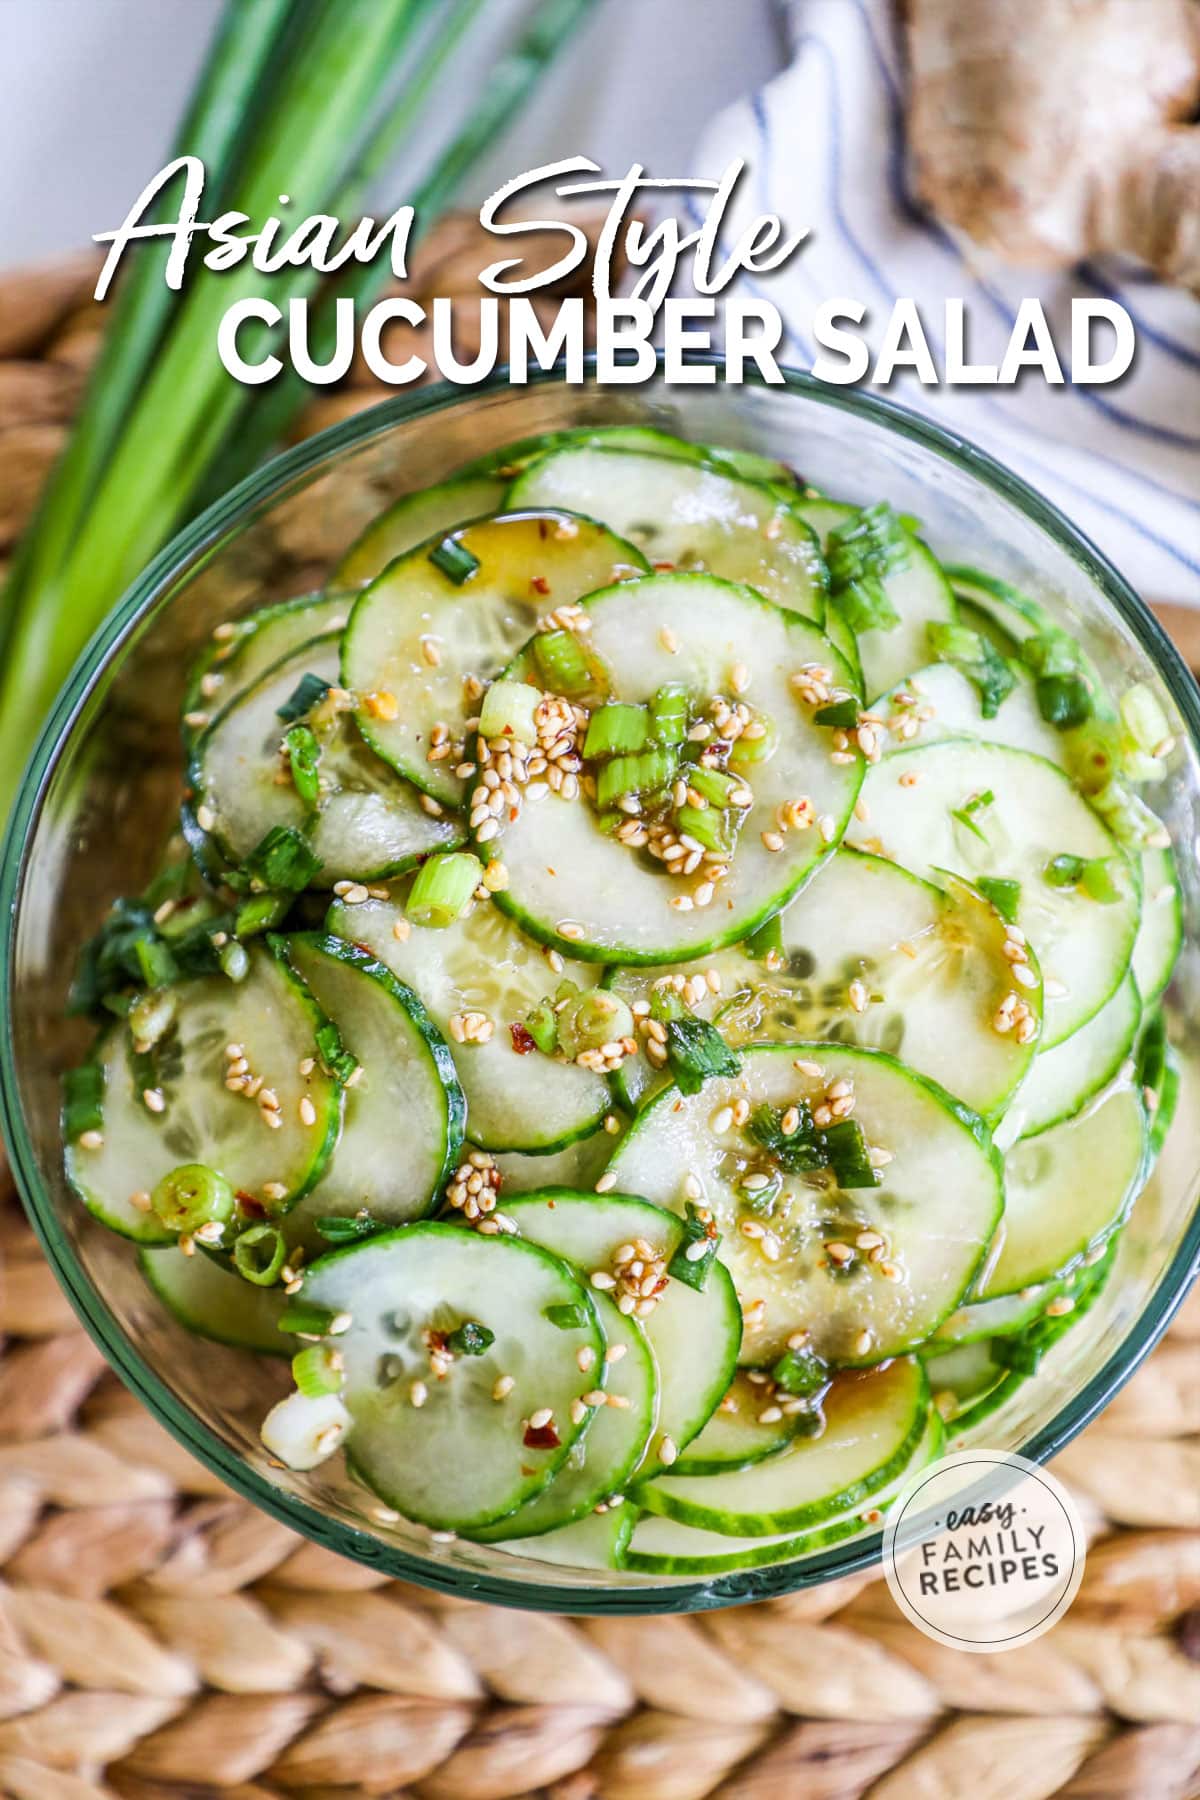 Asian cucumber salad with sesame seeds in a jar.